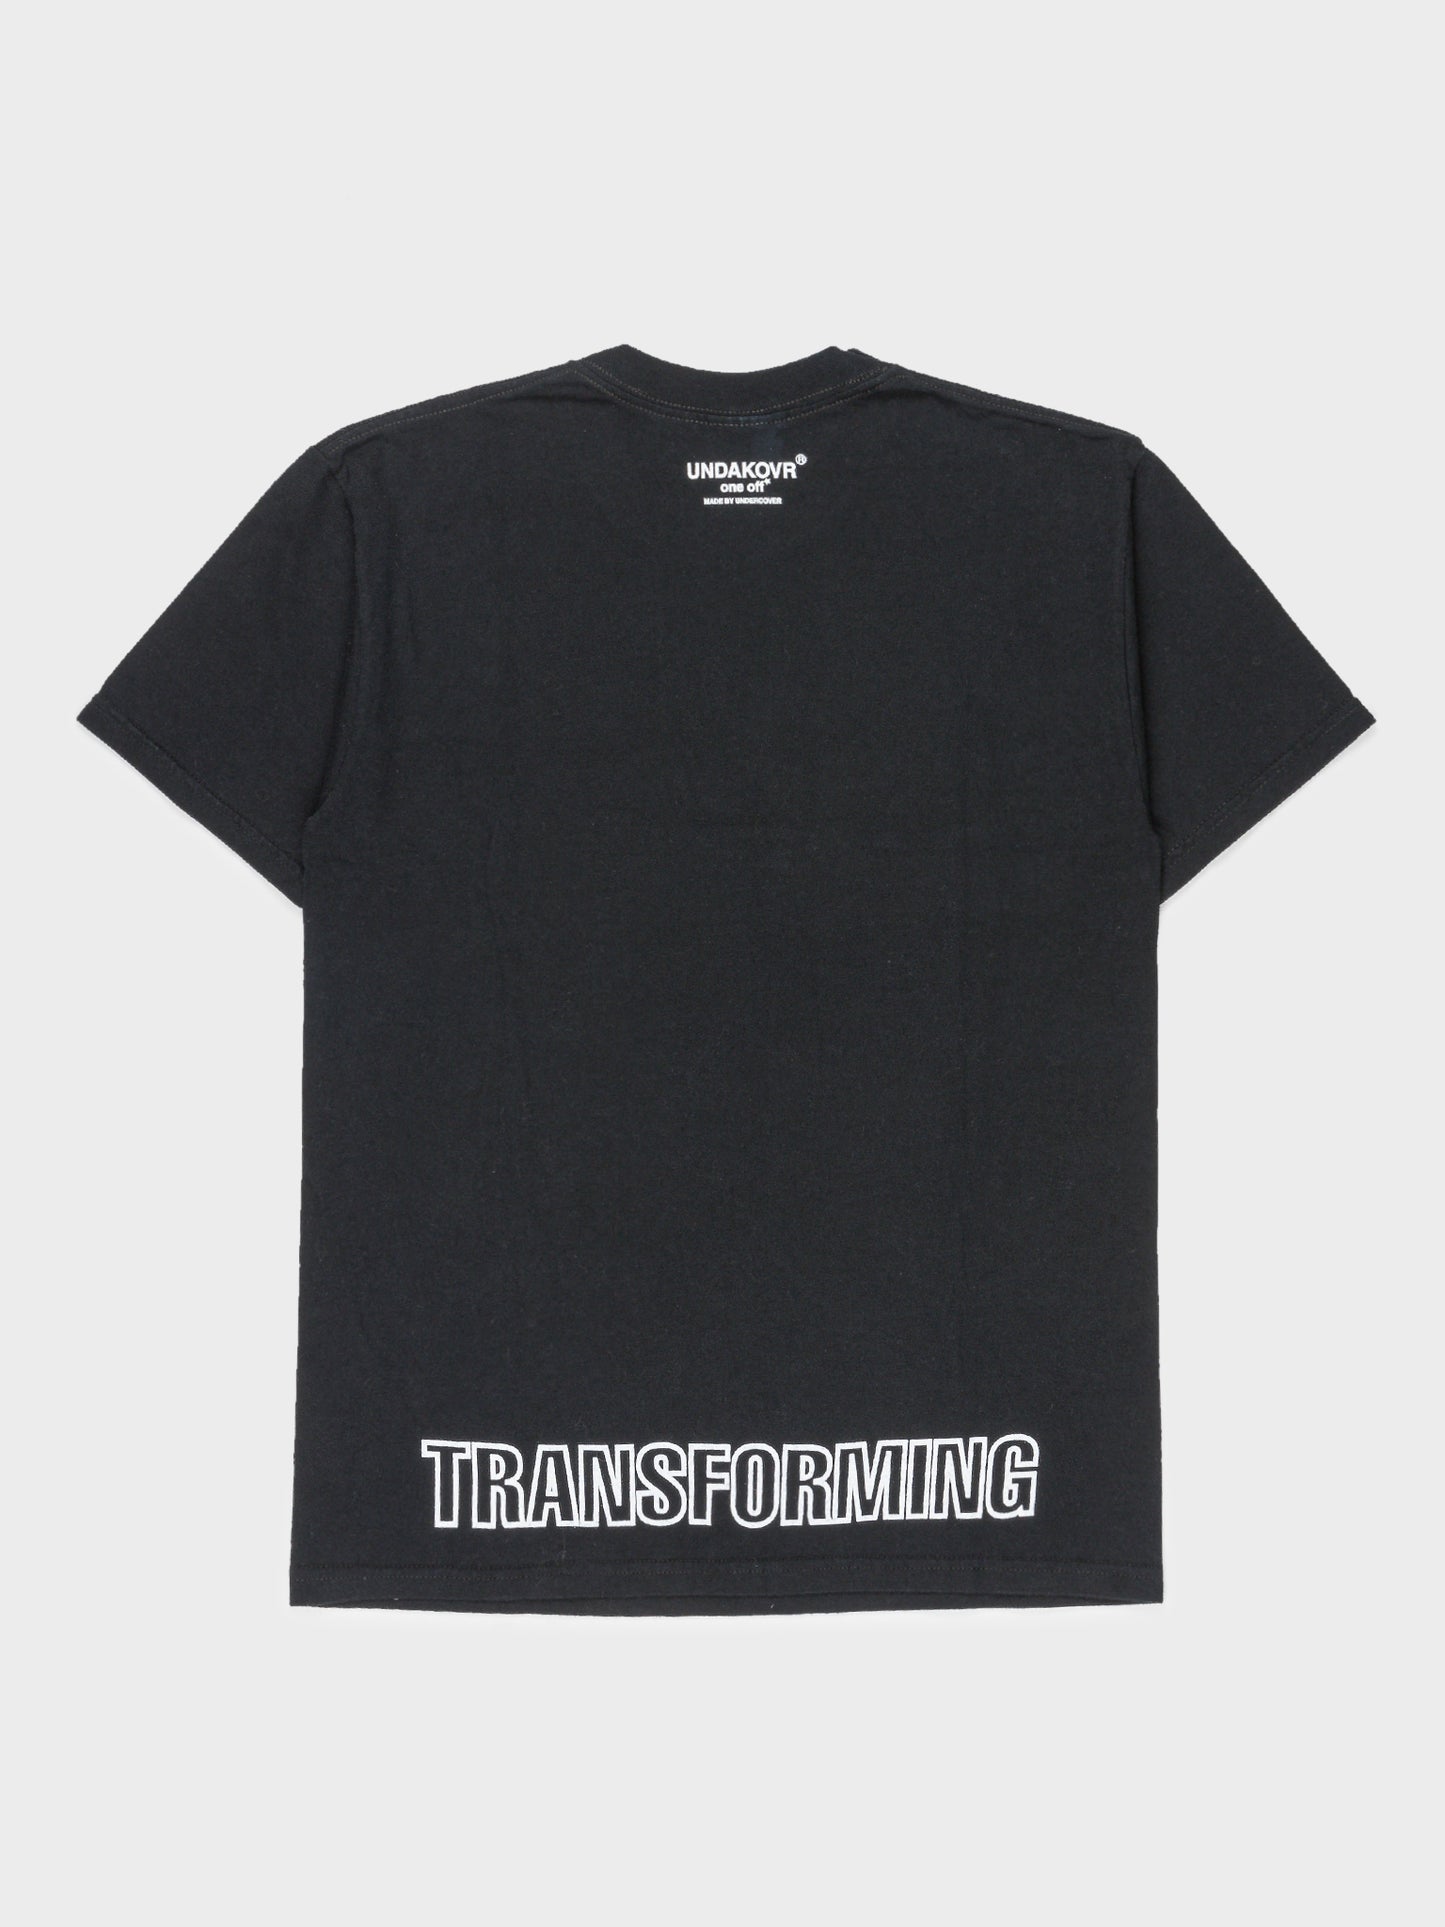 One-off 'Crime' Tee